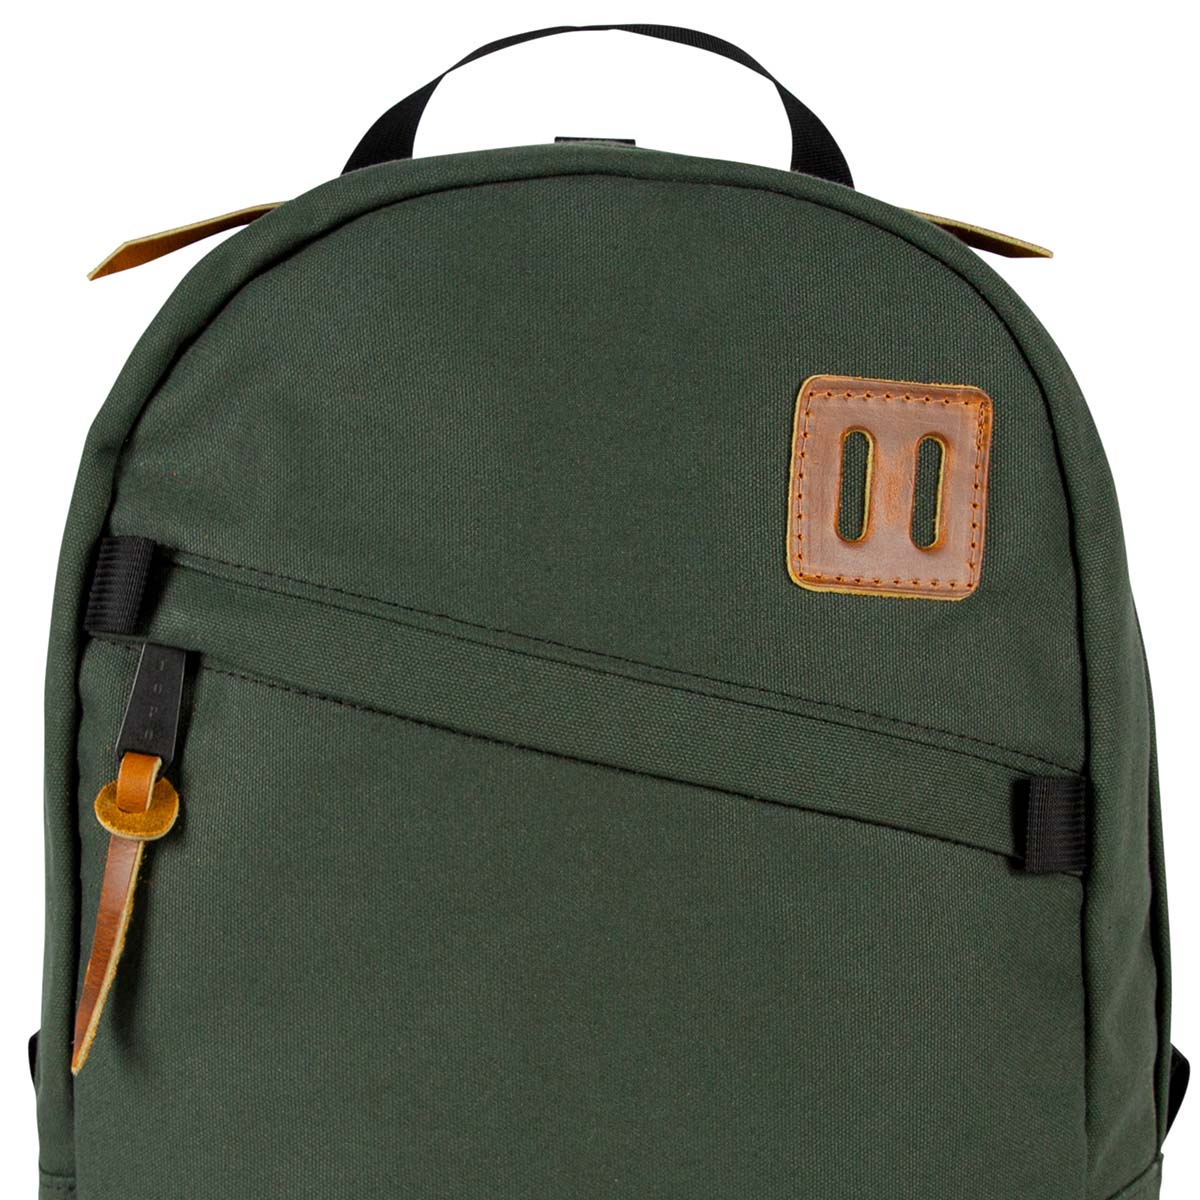 Topo Designs Daypack Heritage Olive Canvas/Brown Leather, stylish and functional pack, ideal travel companion, schoolmate or pack mule